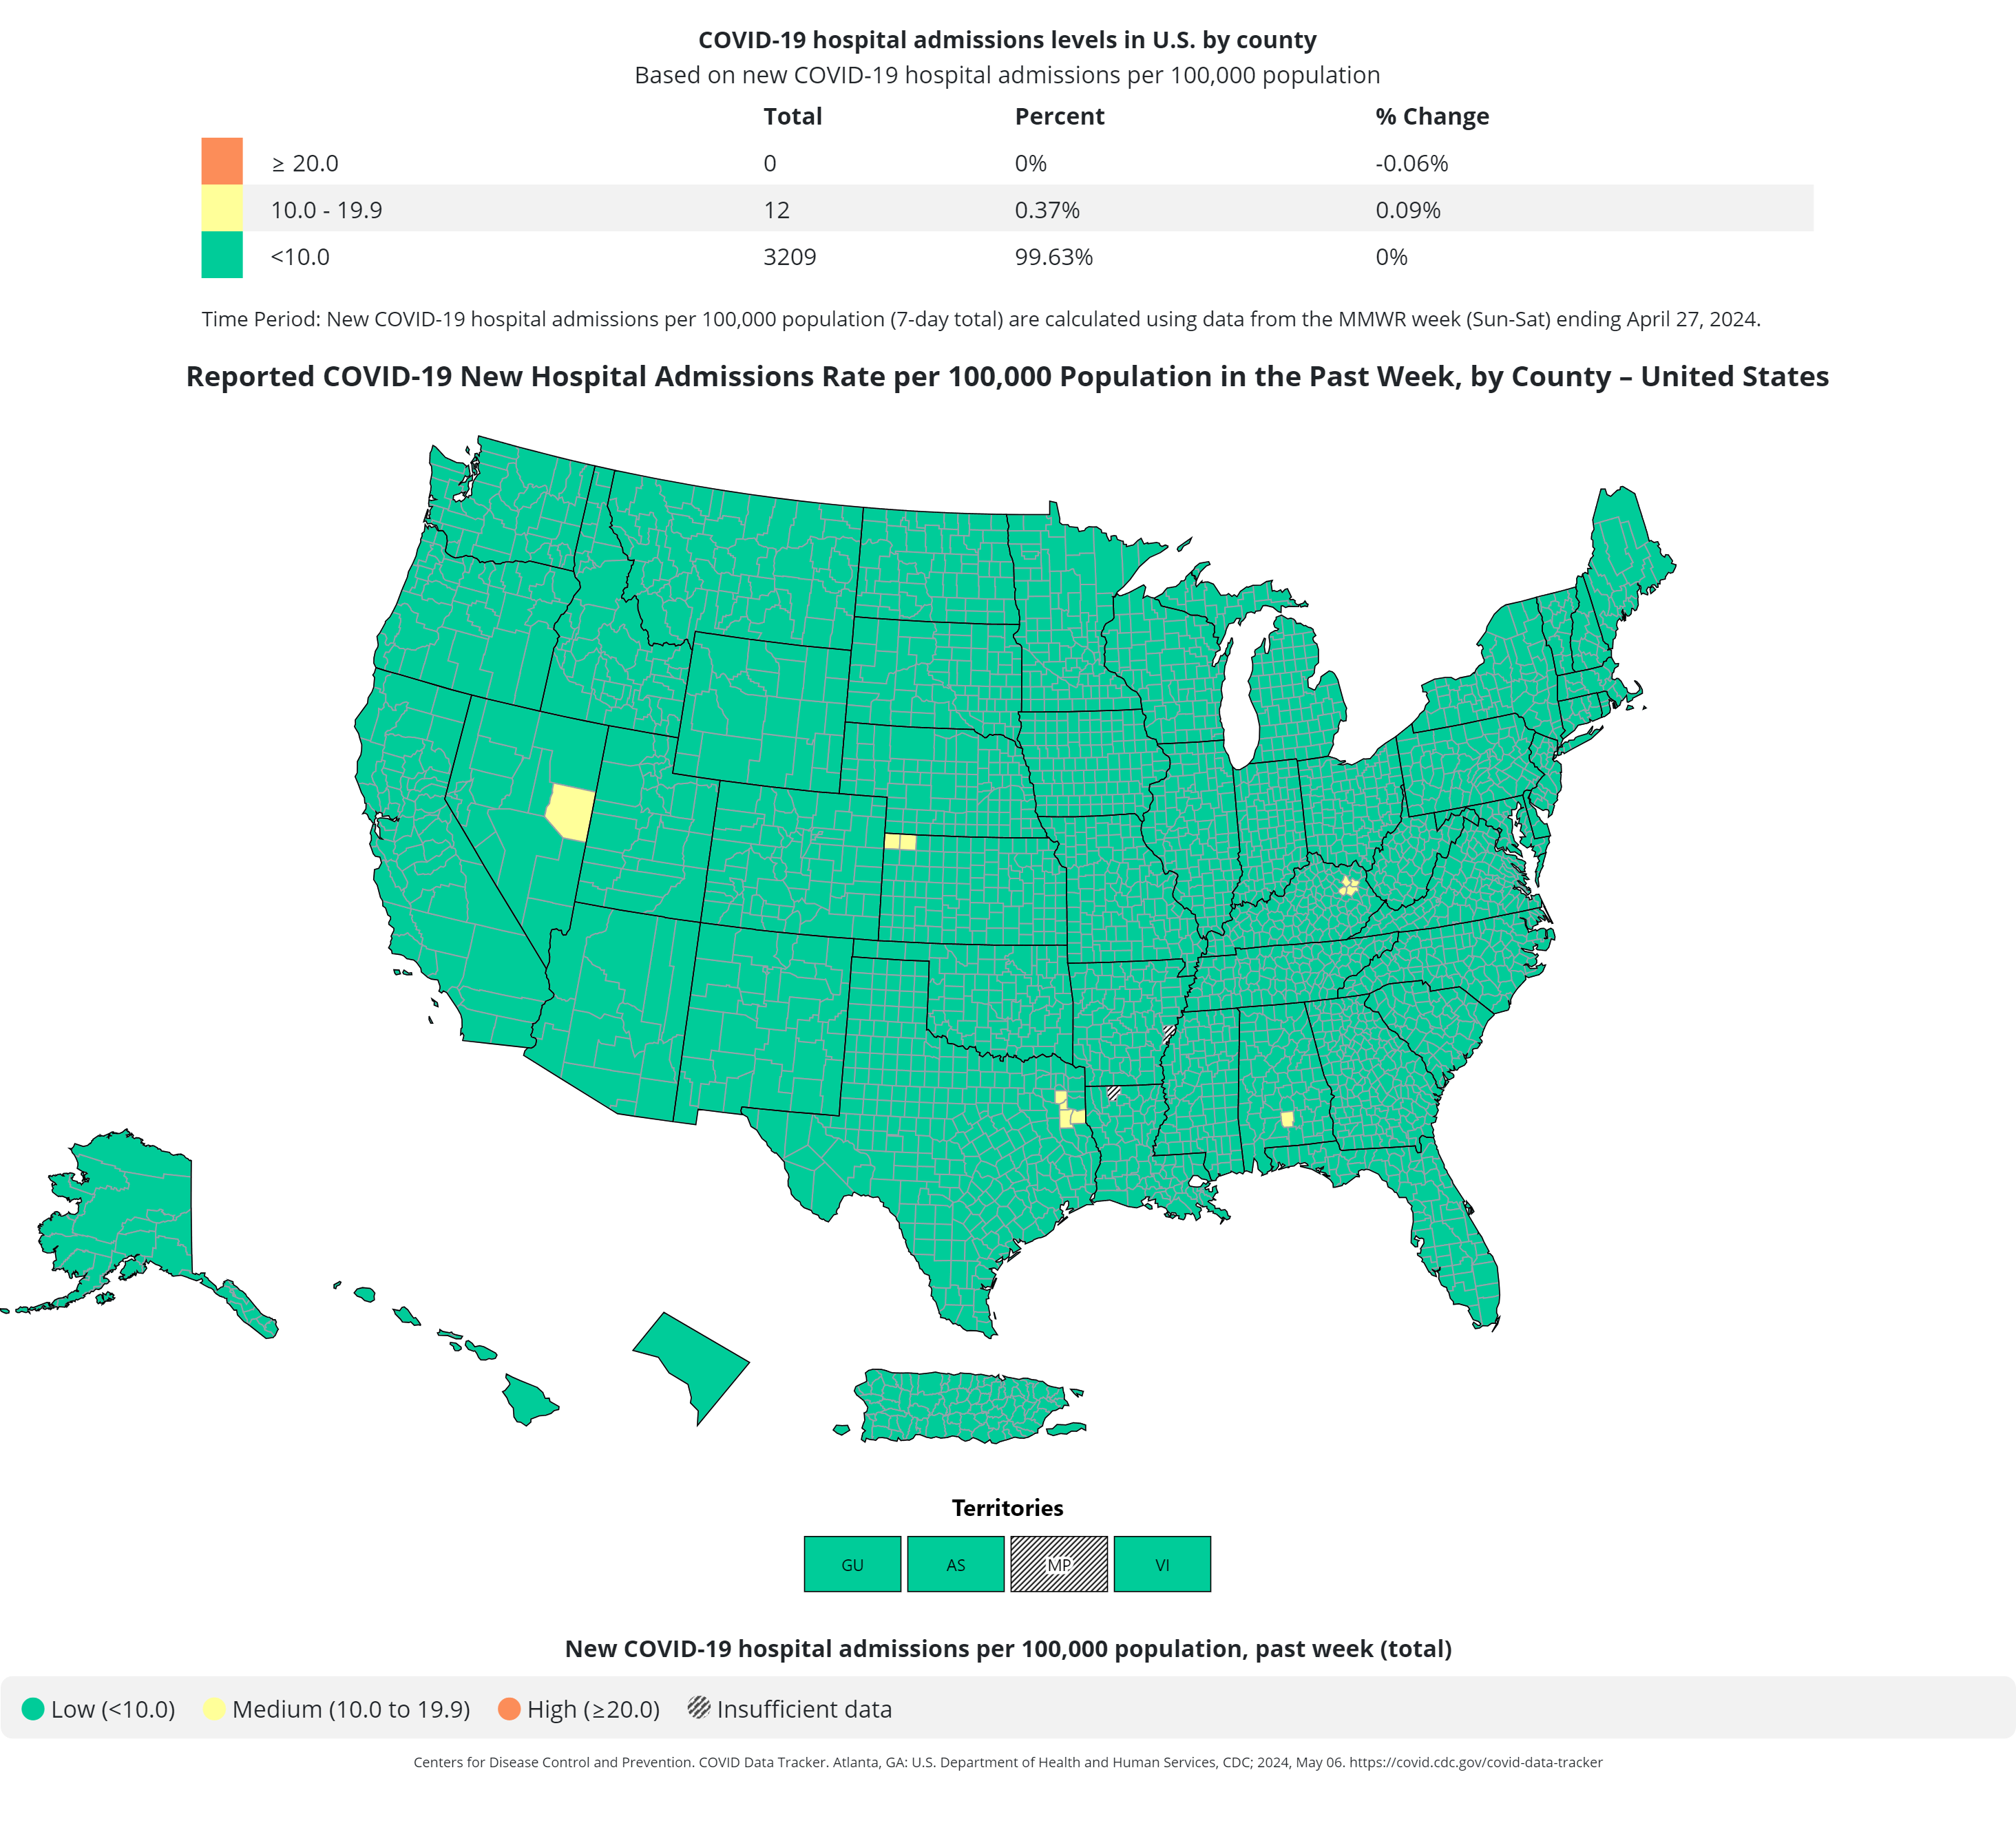 COVID-19 hospital admissions levels in U.S by county, data through April 27, 2024